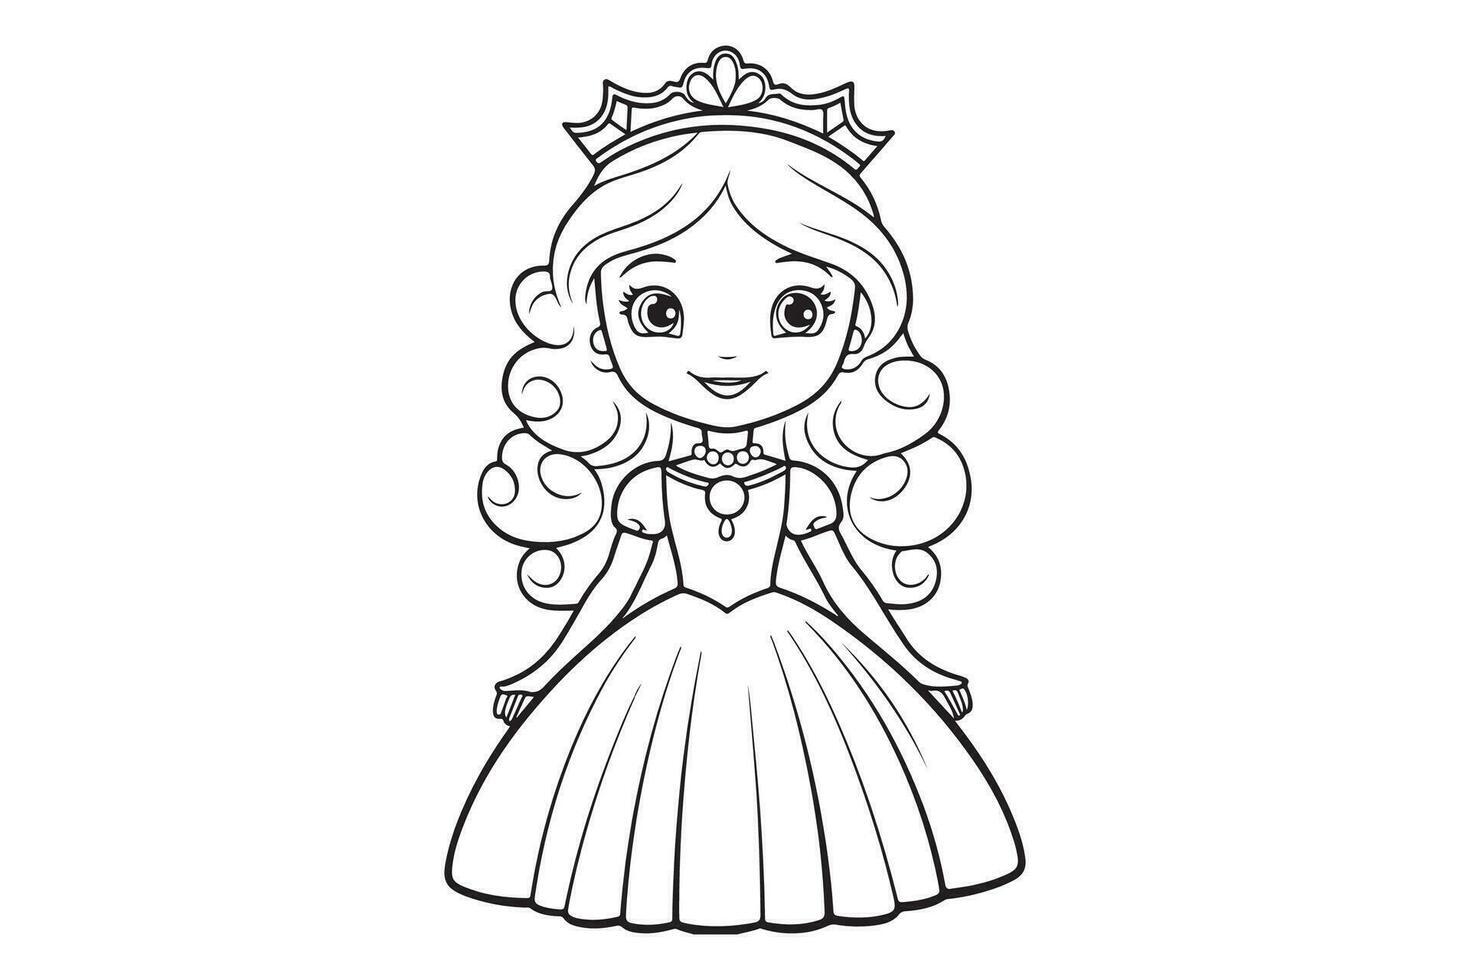 Best Printable Coloring Pages for Kids, Coloring Pages with Girls Characters vector